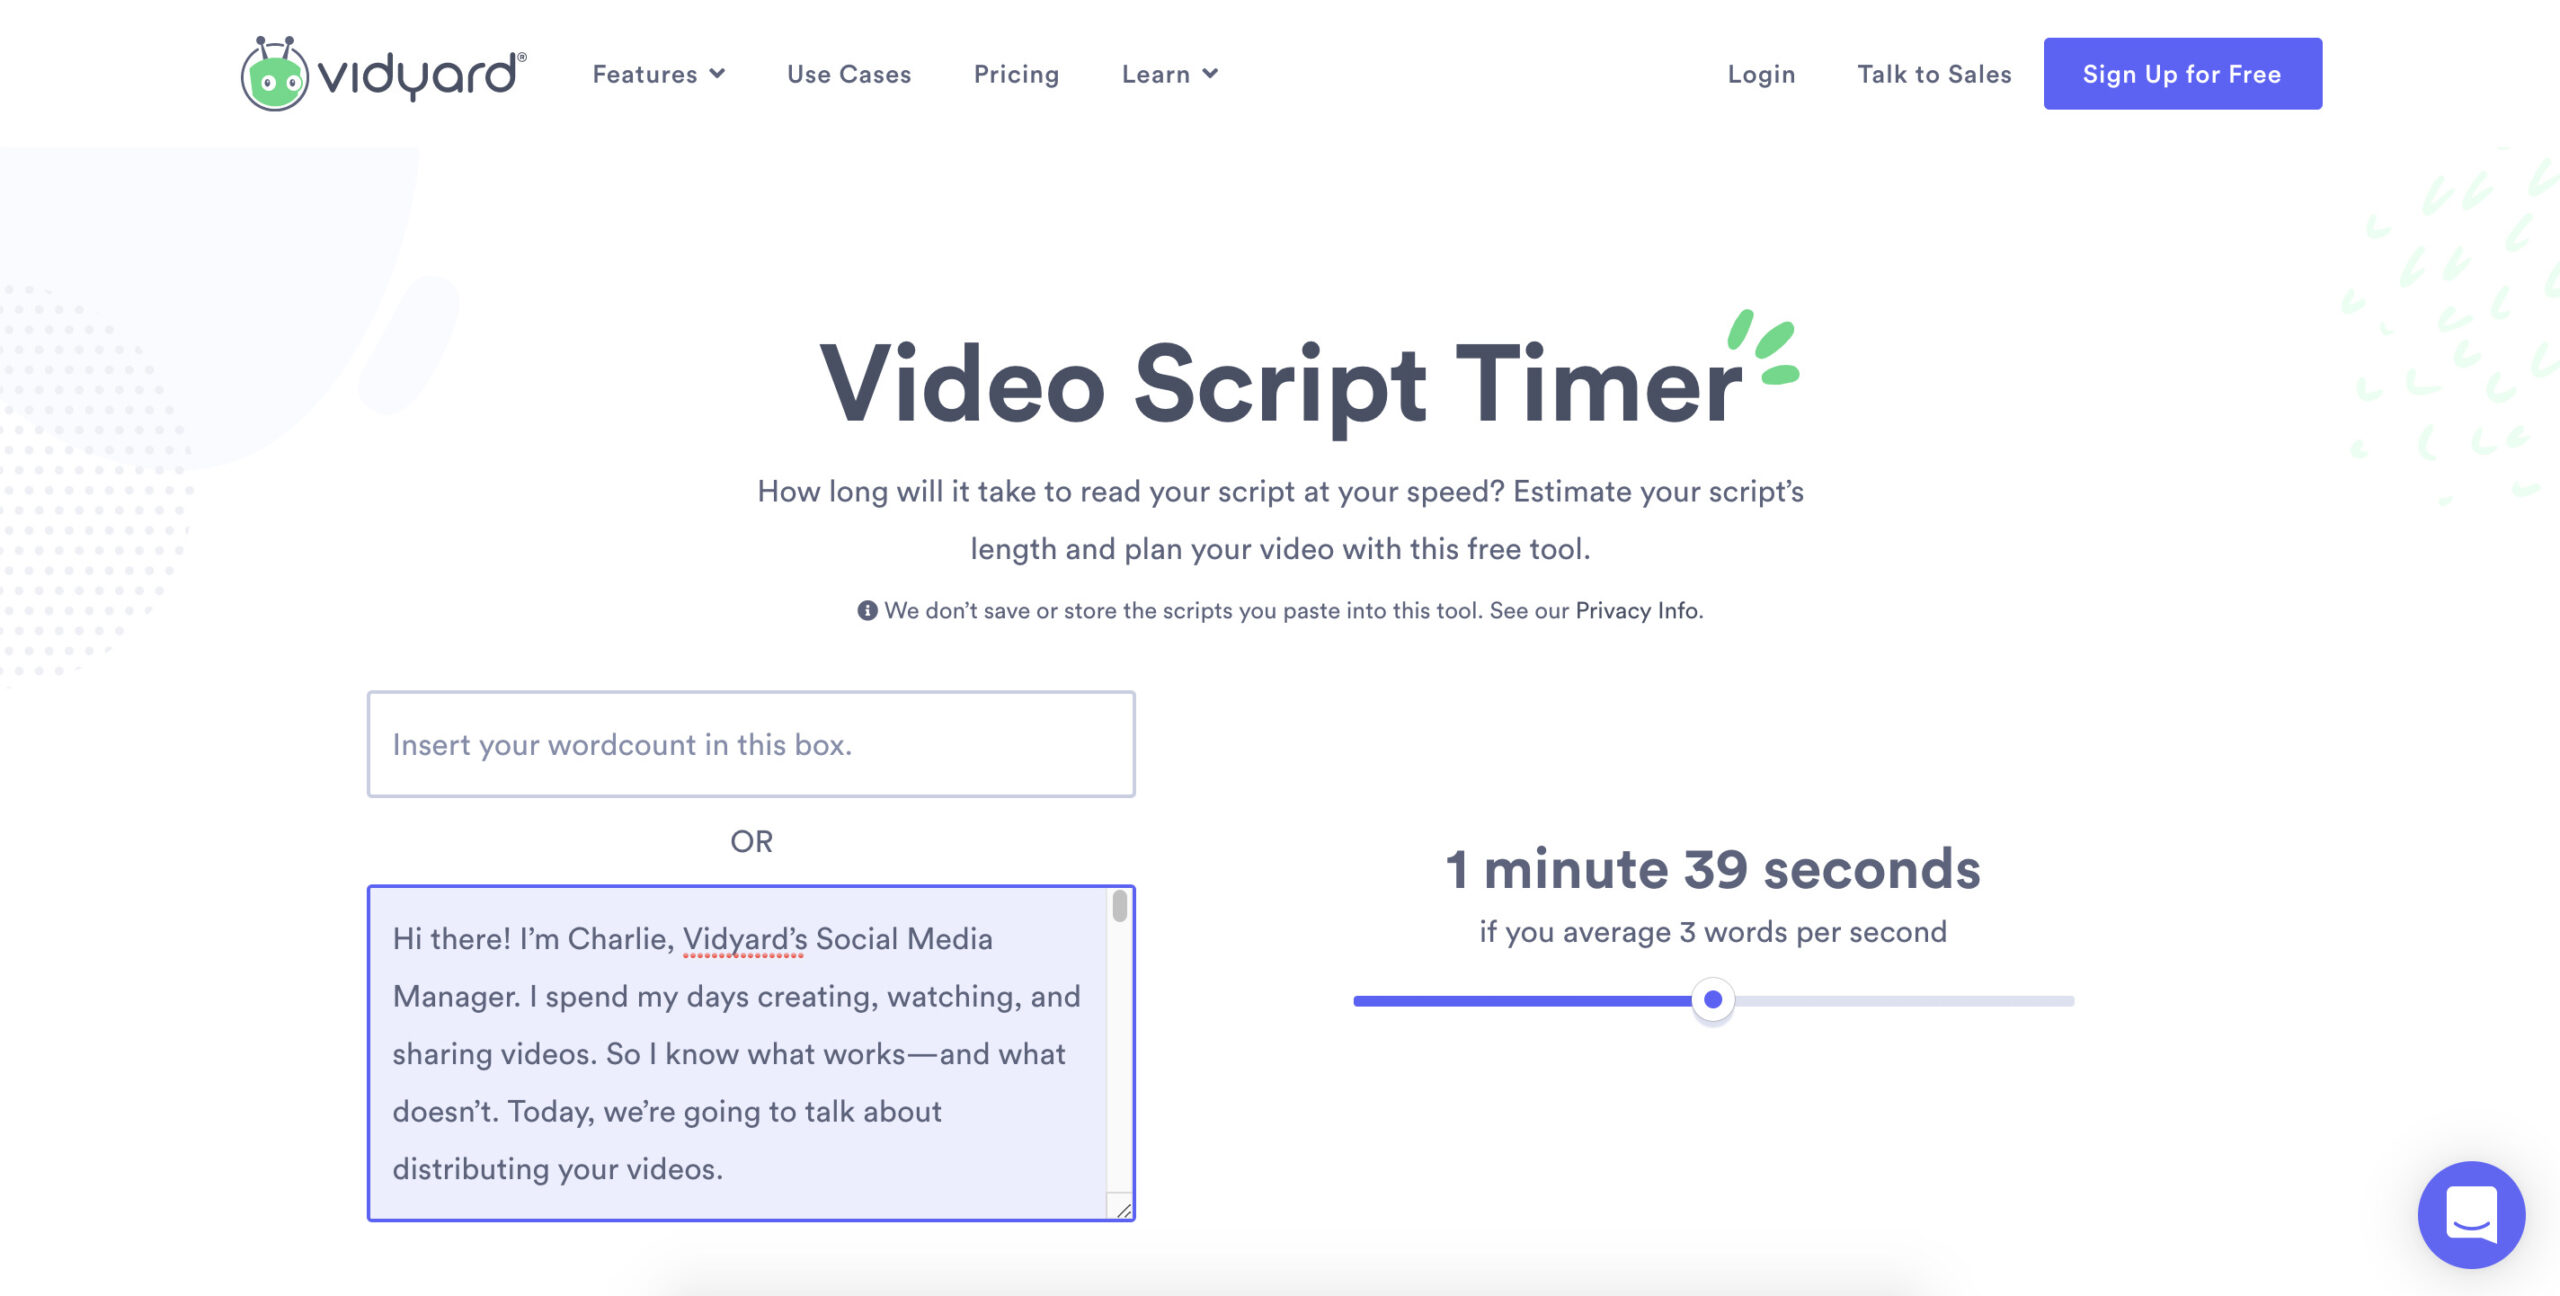 Vidyard's free script timer tool makes it easy to estimate how long your video will be